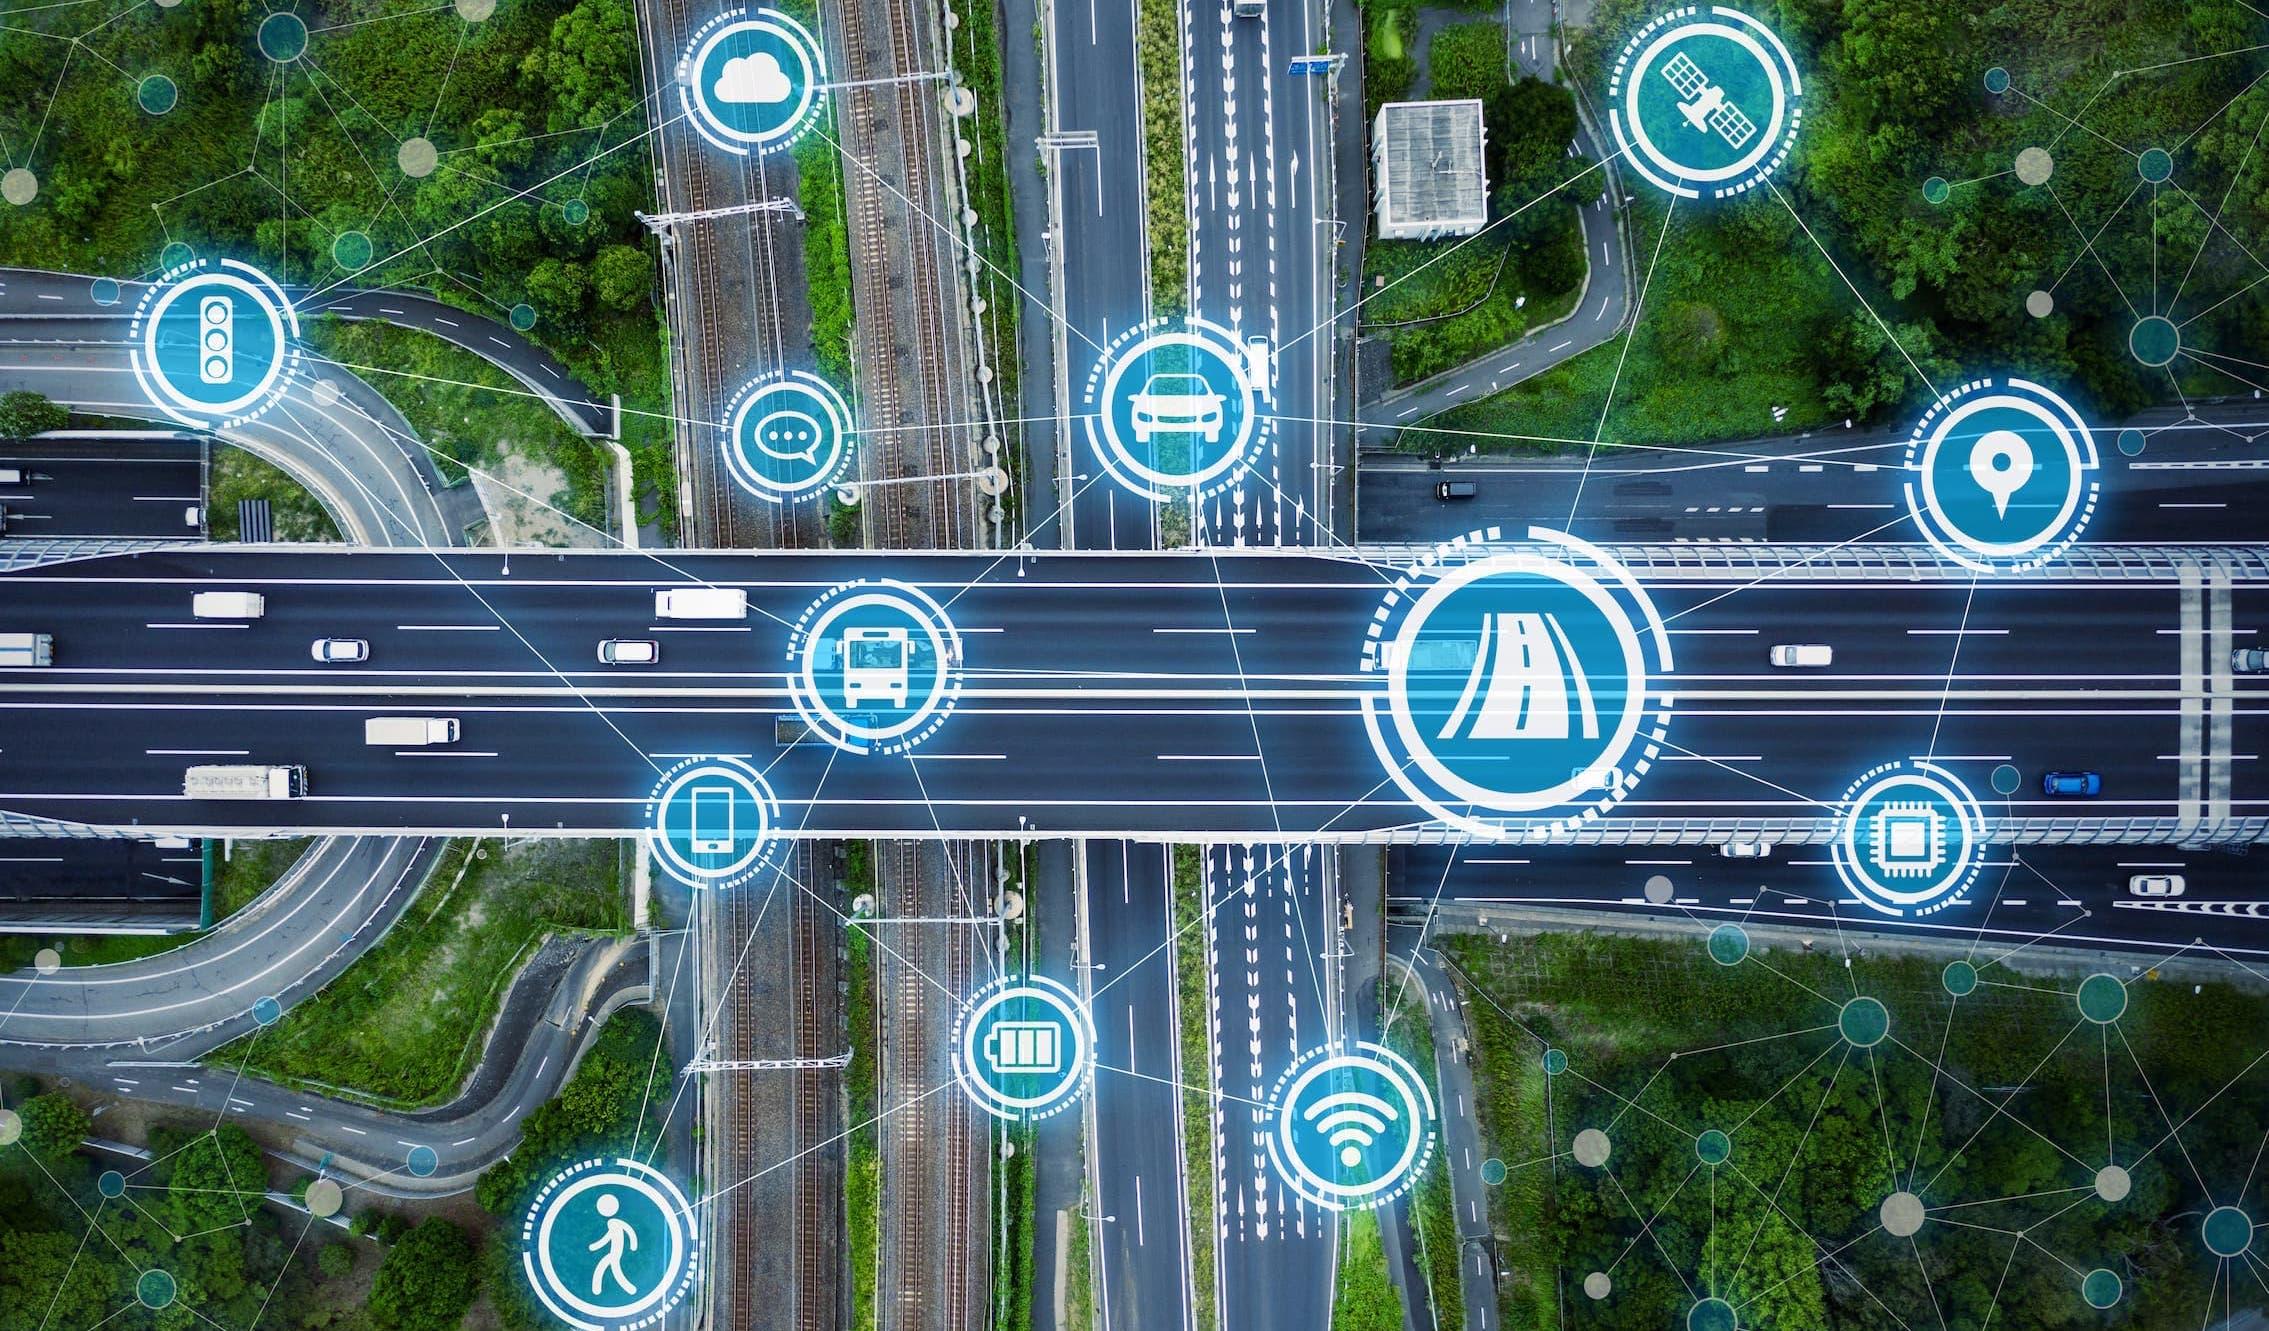 Improving Infrastructure Management Through IoT Devices and Sensors